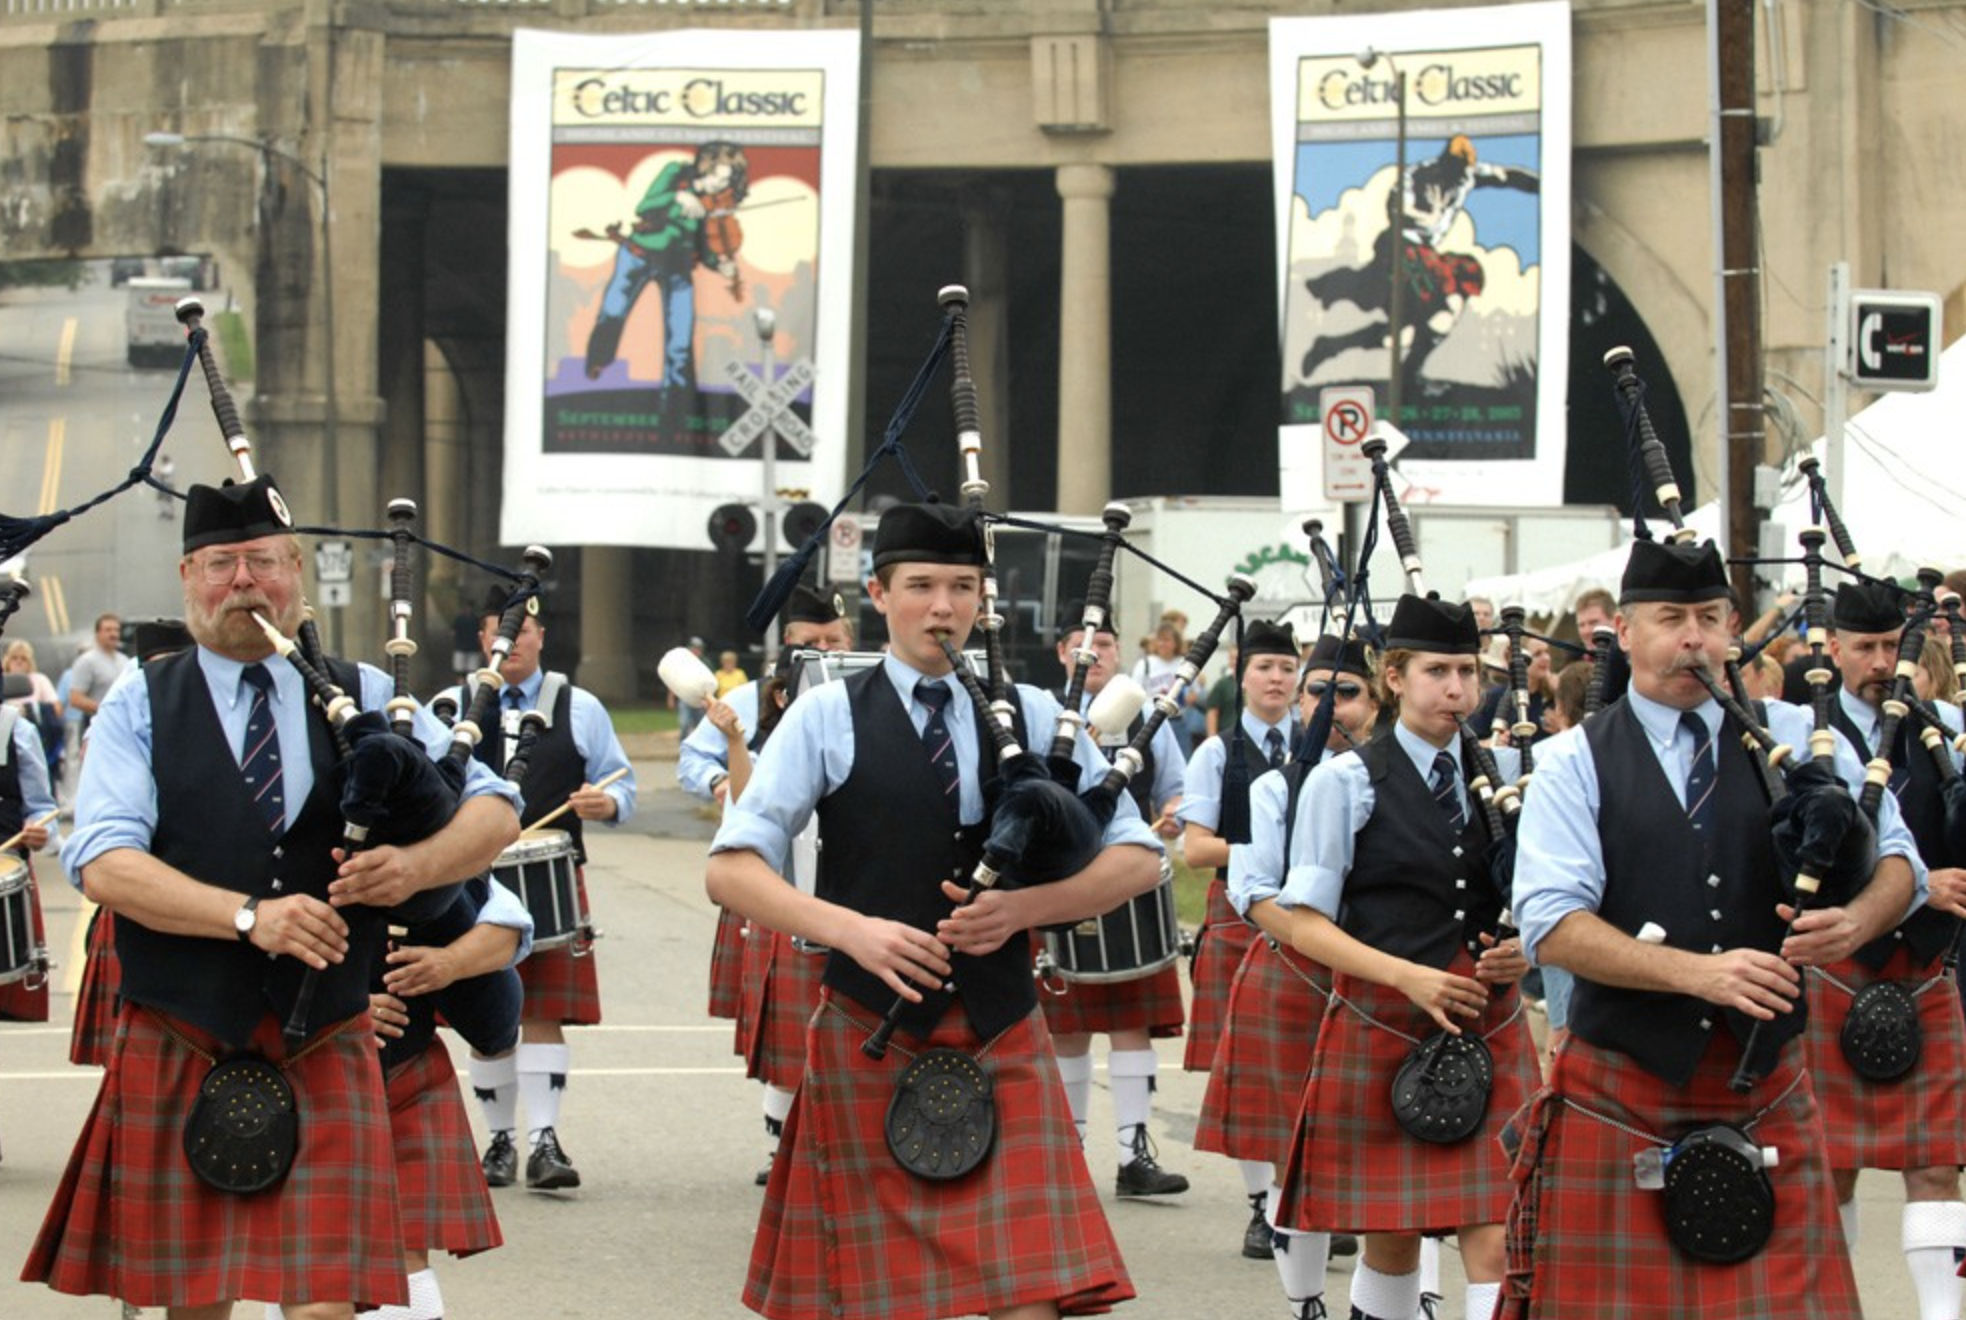 Scholarships, Cultural education: Promote and Preserve Celtic culture and Celtic Classic Highland Games & Festival